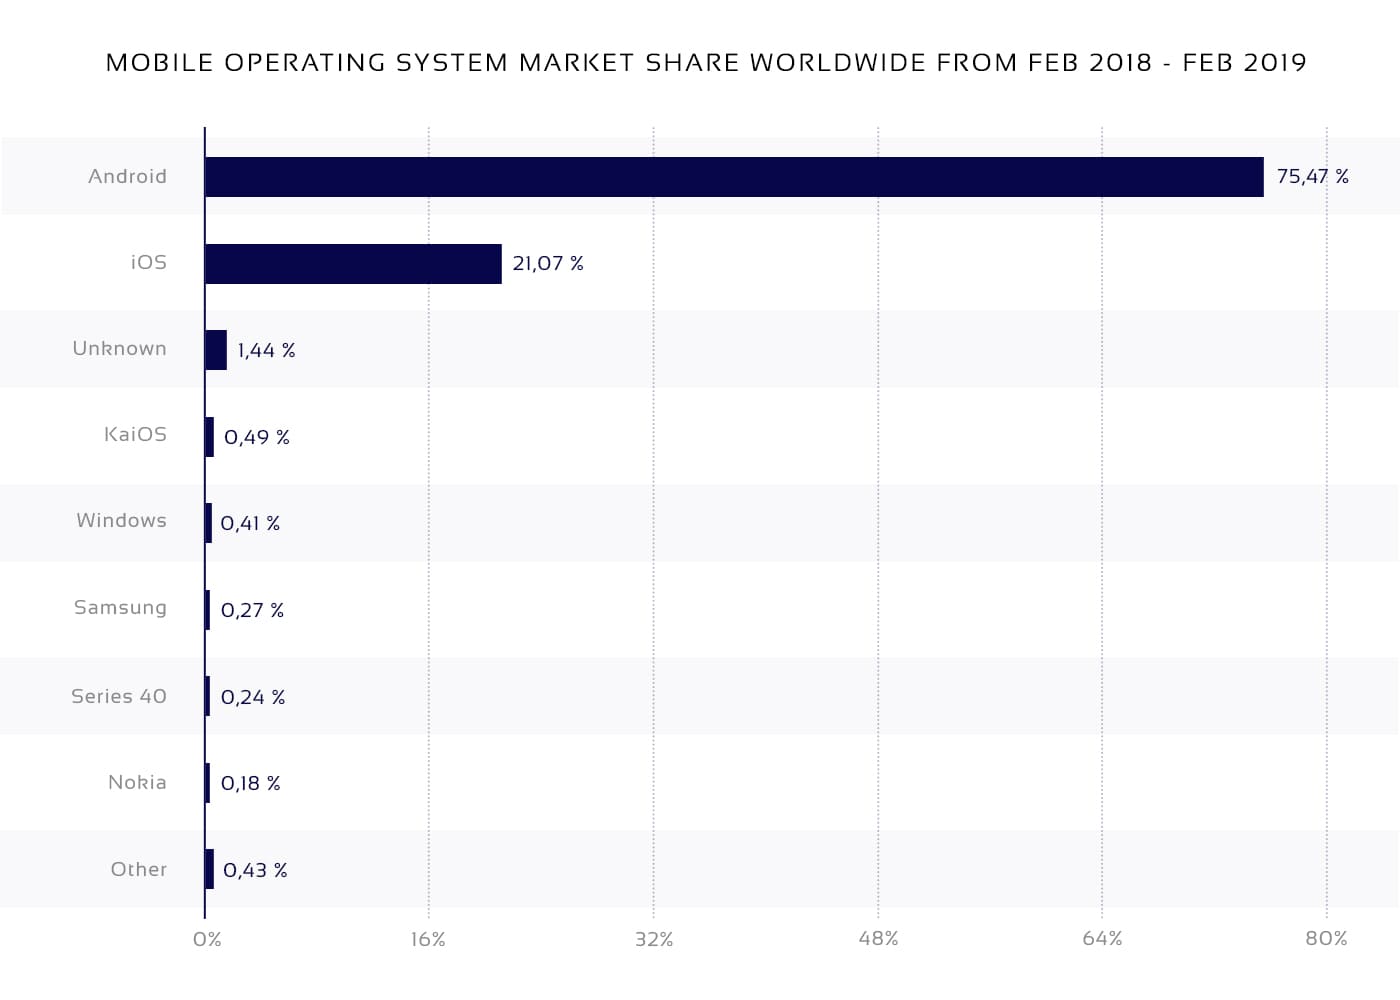 Mobile OS market share in P2P marketplace